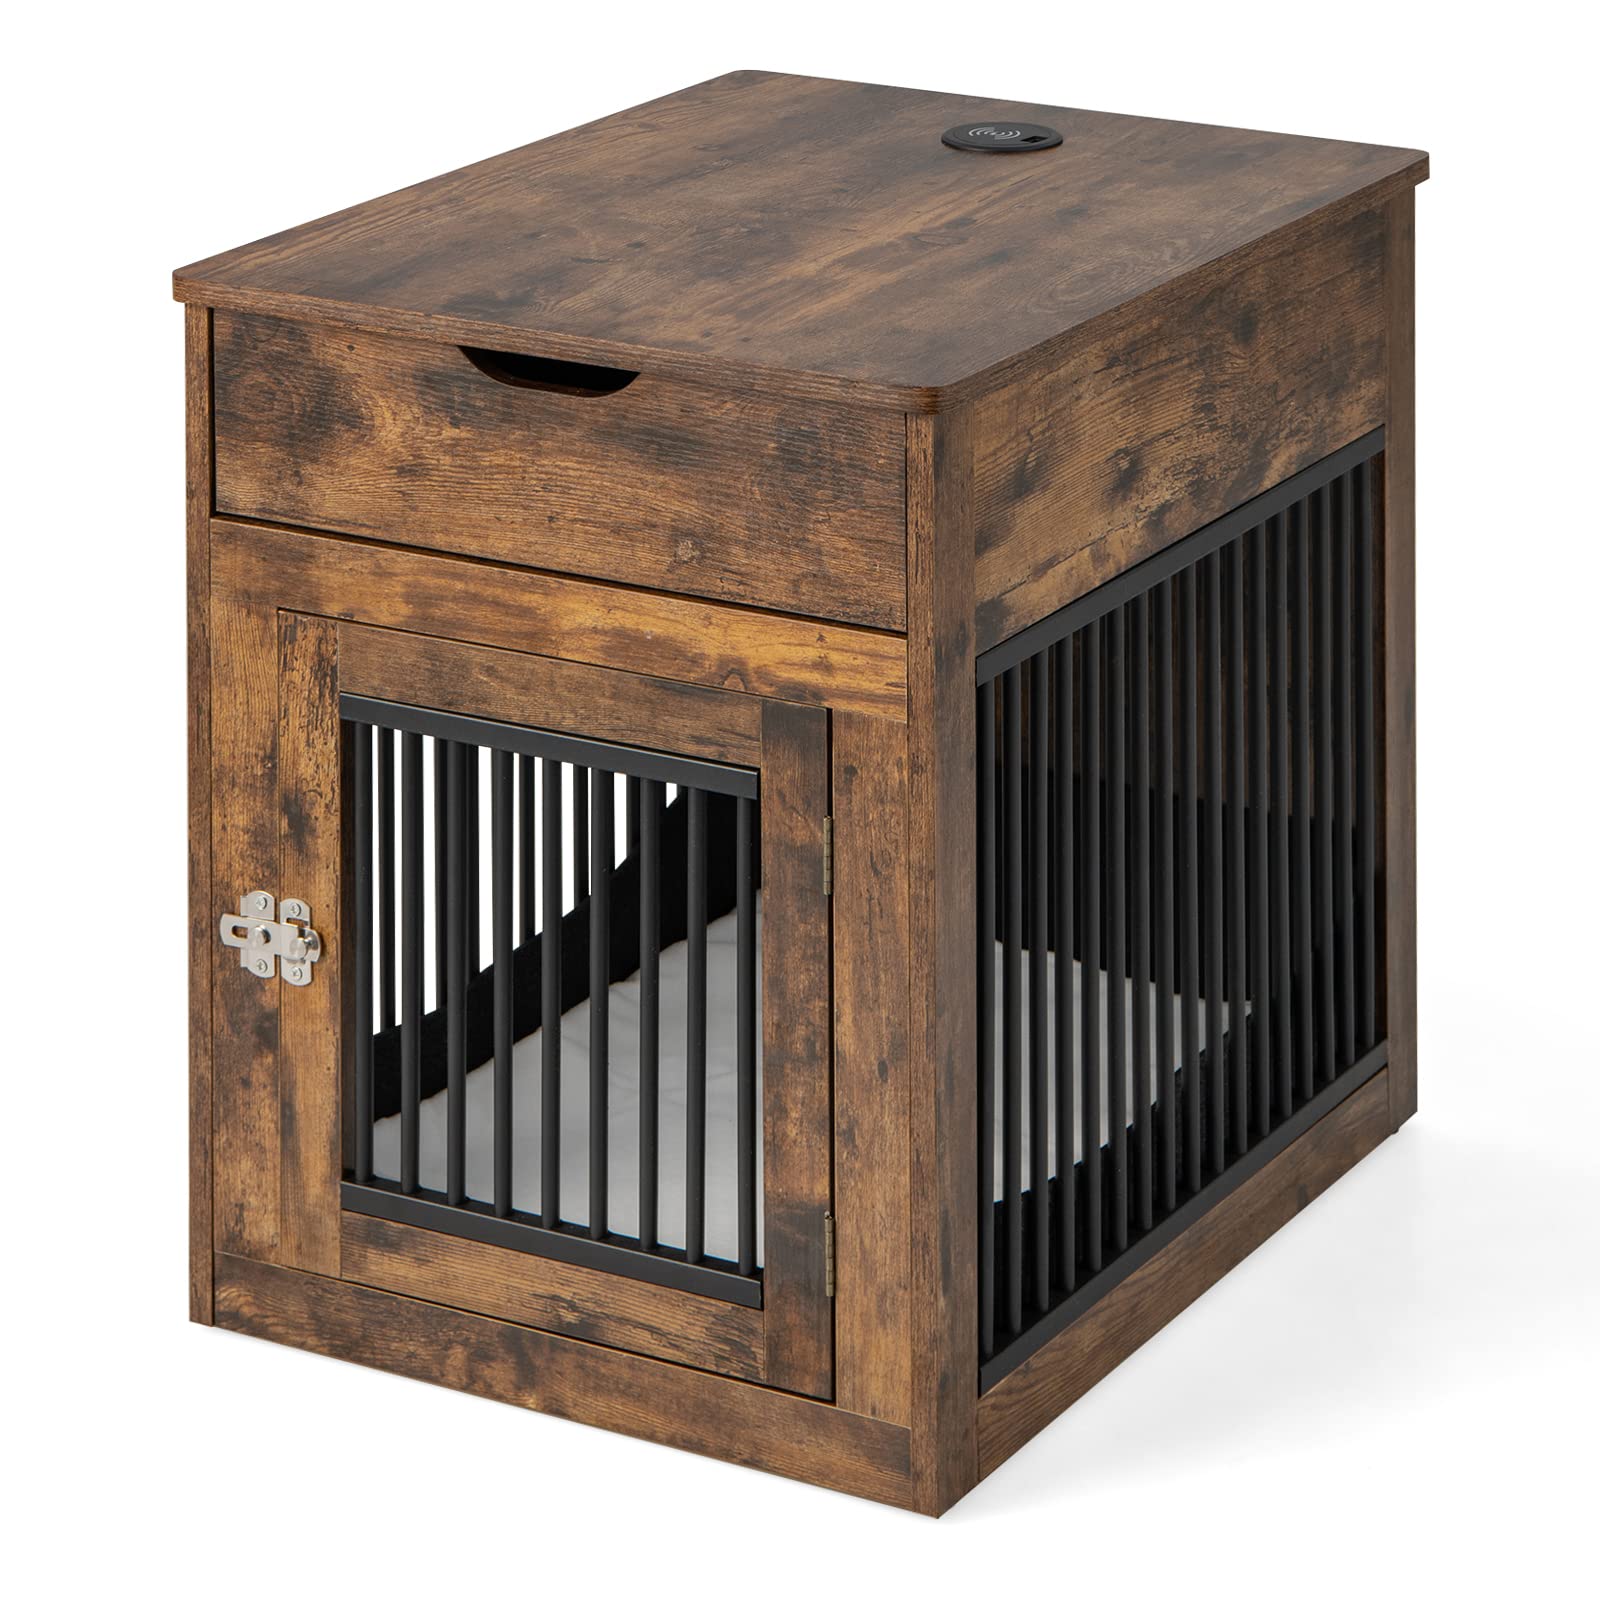 Giantex Dog Crate Furniture, Dog Kennel End Table with Chew-Proof Metal Fence, Lockable Door